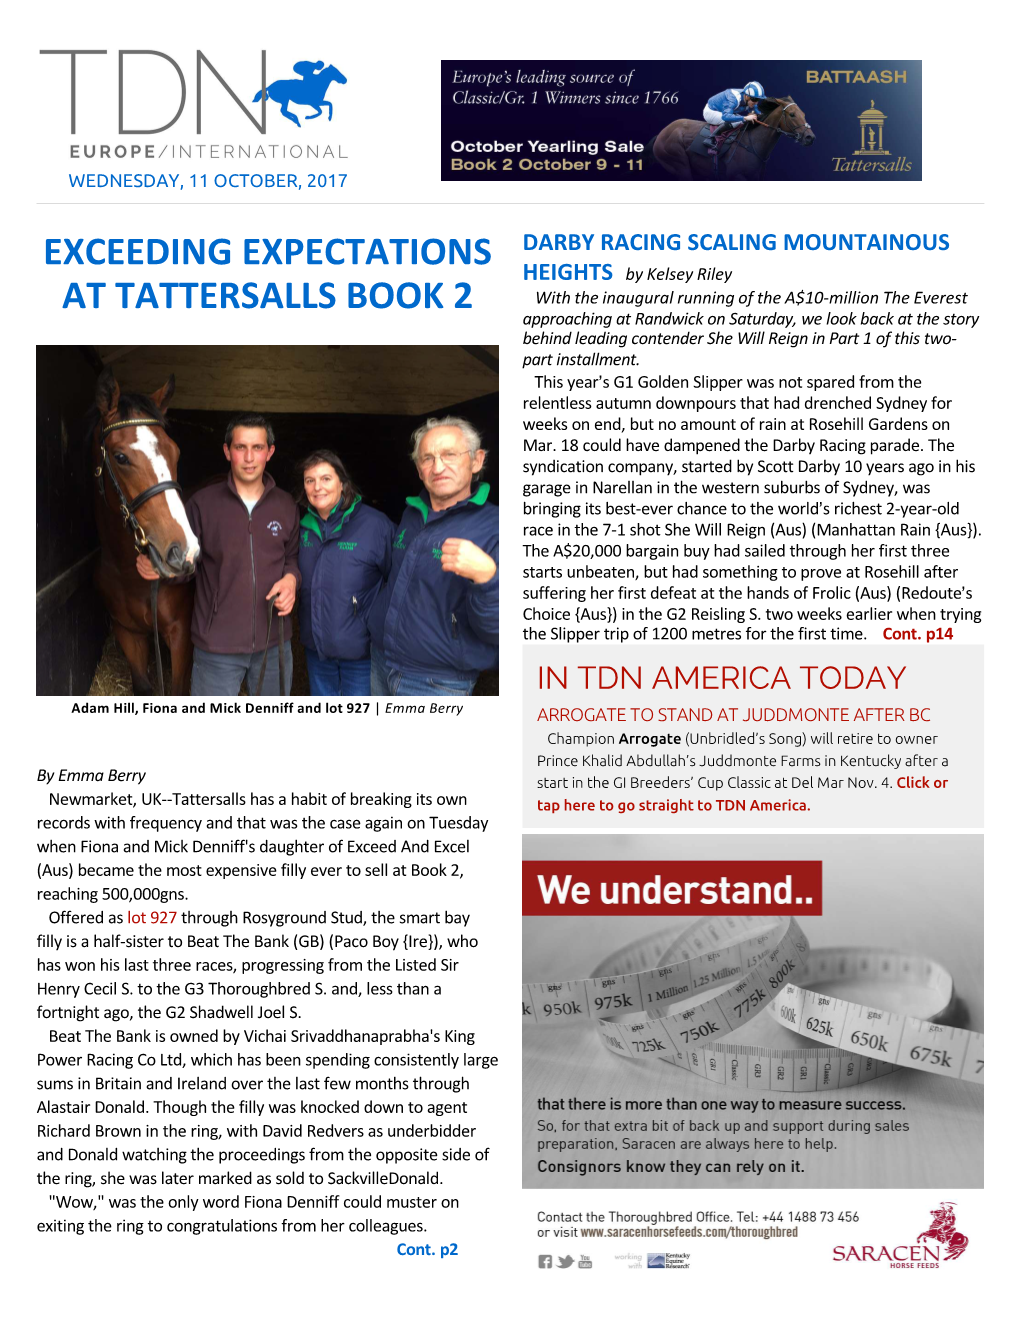 Exceeding Expectations at Tattersalls Book 2 Cont